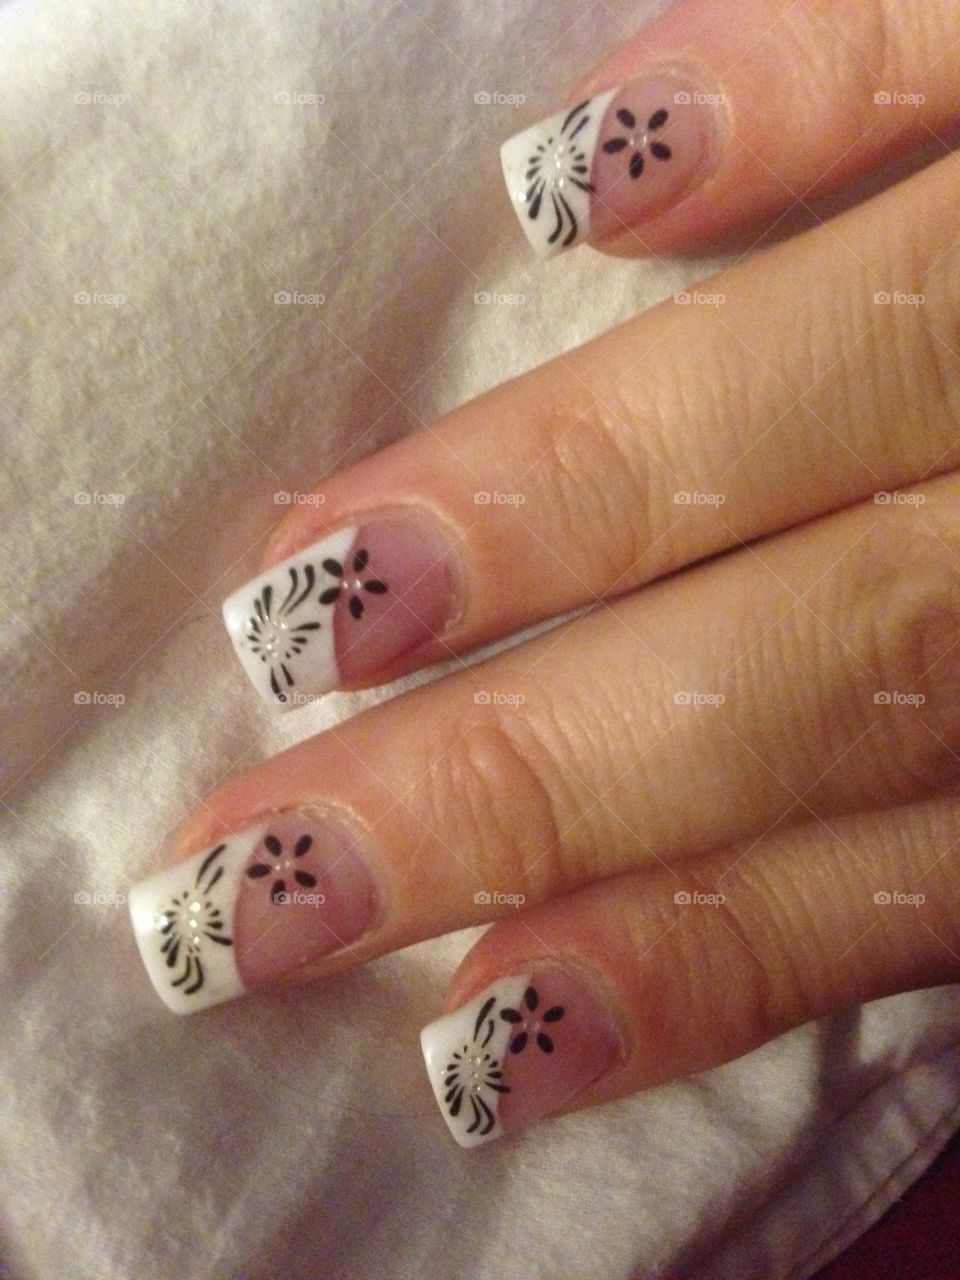 French manicure with a fun twist